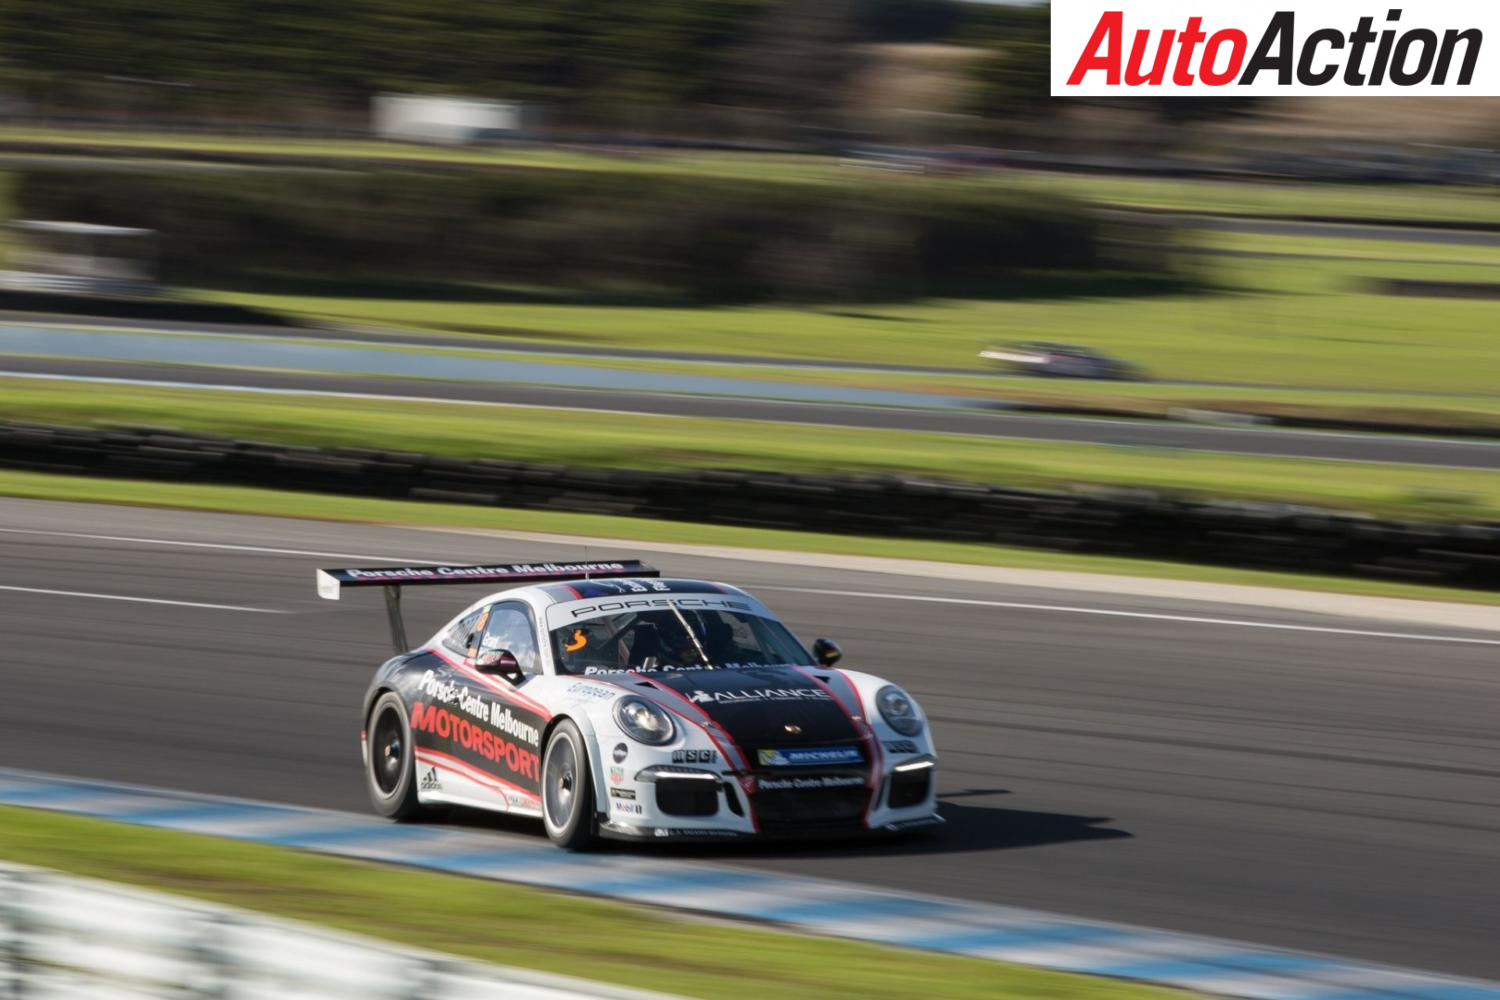 Dean Grant and Lee Holdsworth won second leg of Porsche Carrera Cup Pro-Am - Photo: Rhys Vandersyde